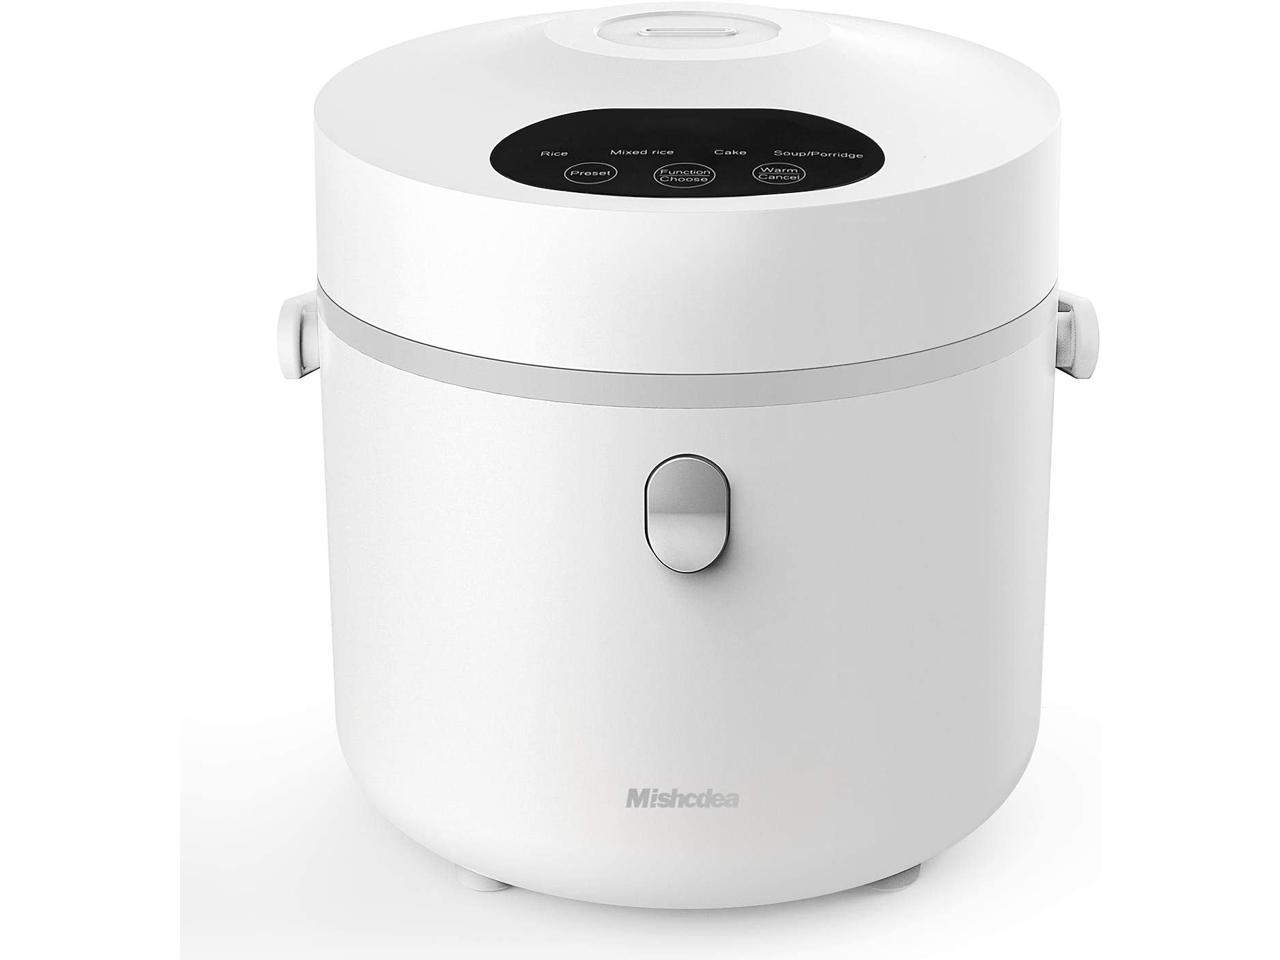 Mishcdea Small Rice Cooker, Personal Size Cooker for 1-2 People 